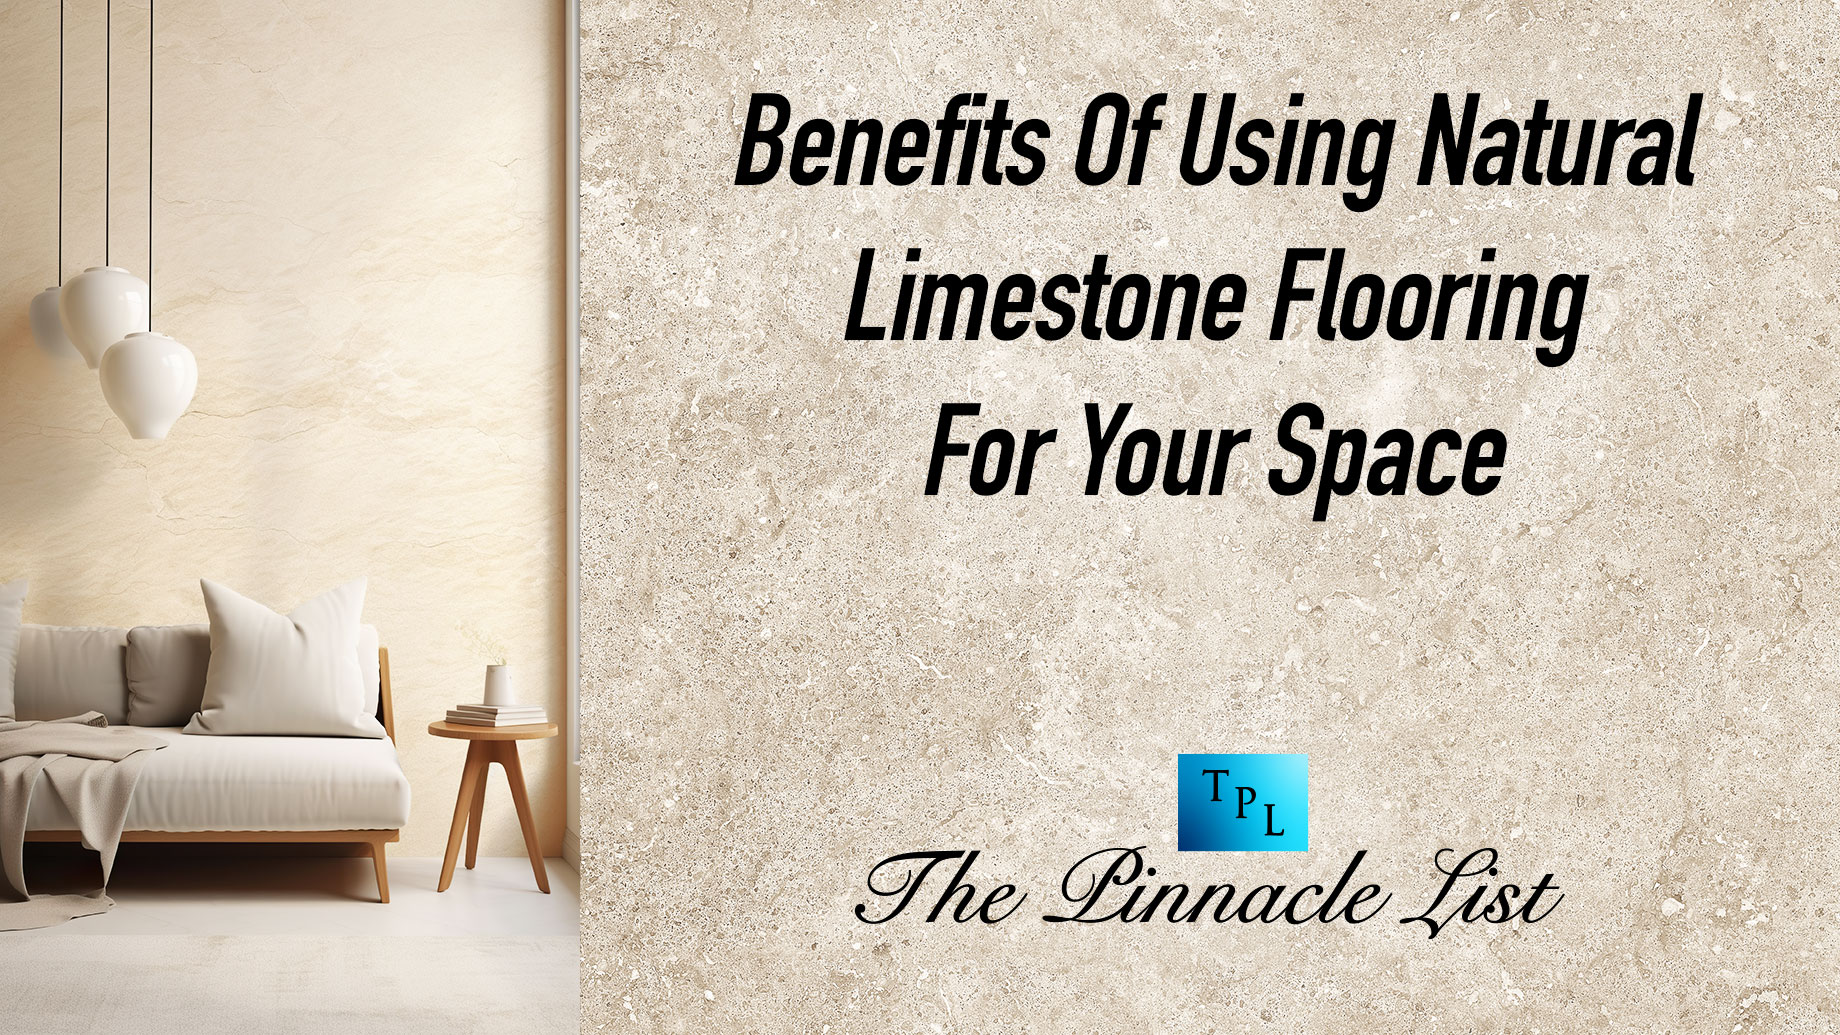 Benefits Of Using Natural Limestone Flooring For Your Space